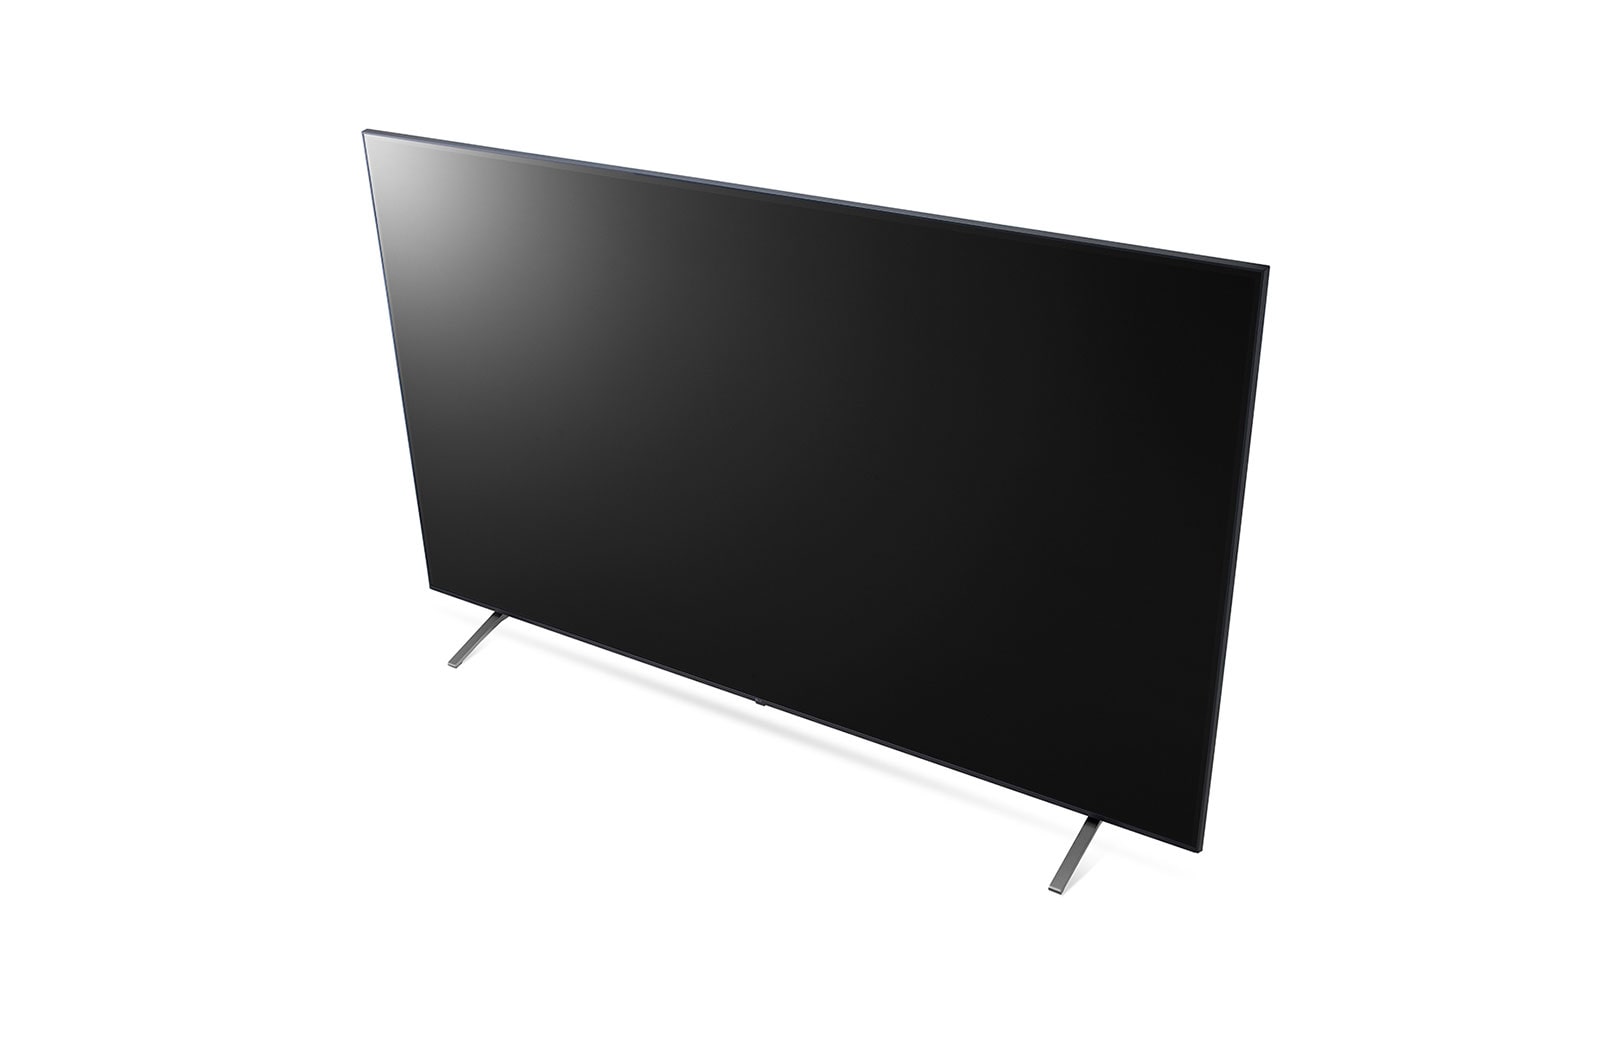 Lg 55" UR640S Series UHD Signage TV with Slim Depth, LG SuperSign CMS, and Embedded Content